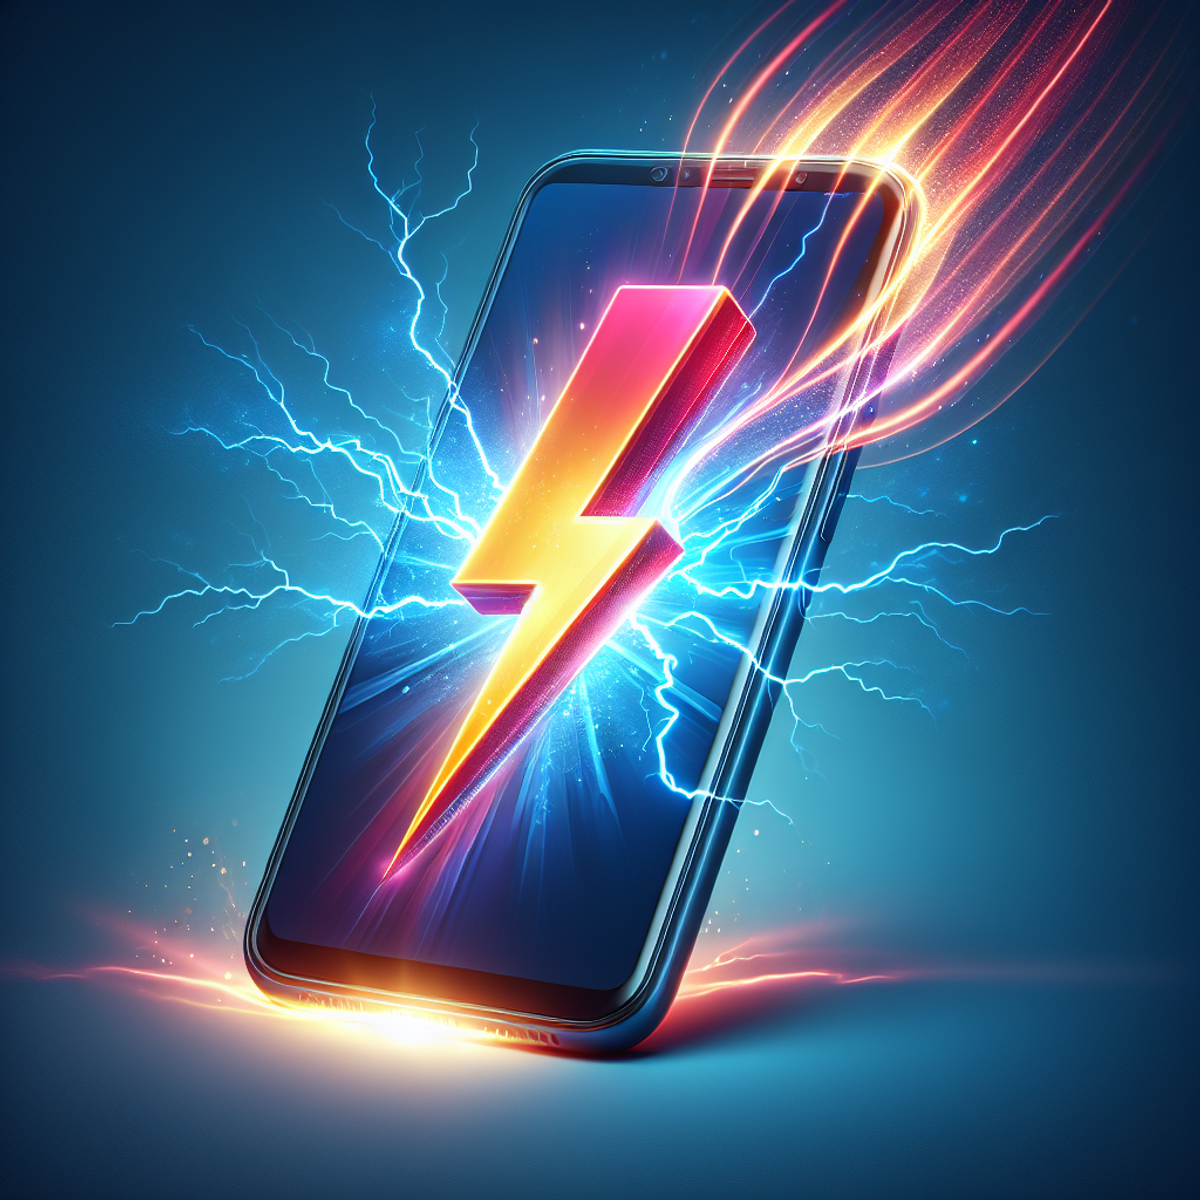 A smartphone with a lightning bolt symbol on the screen, surrounded by a radiant glow.